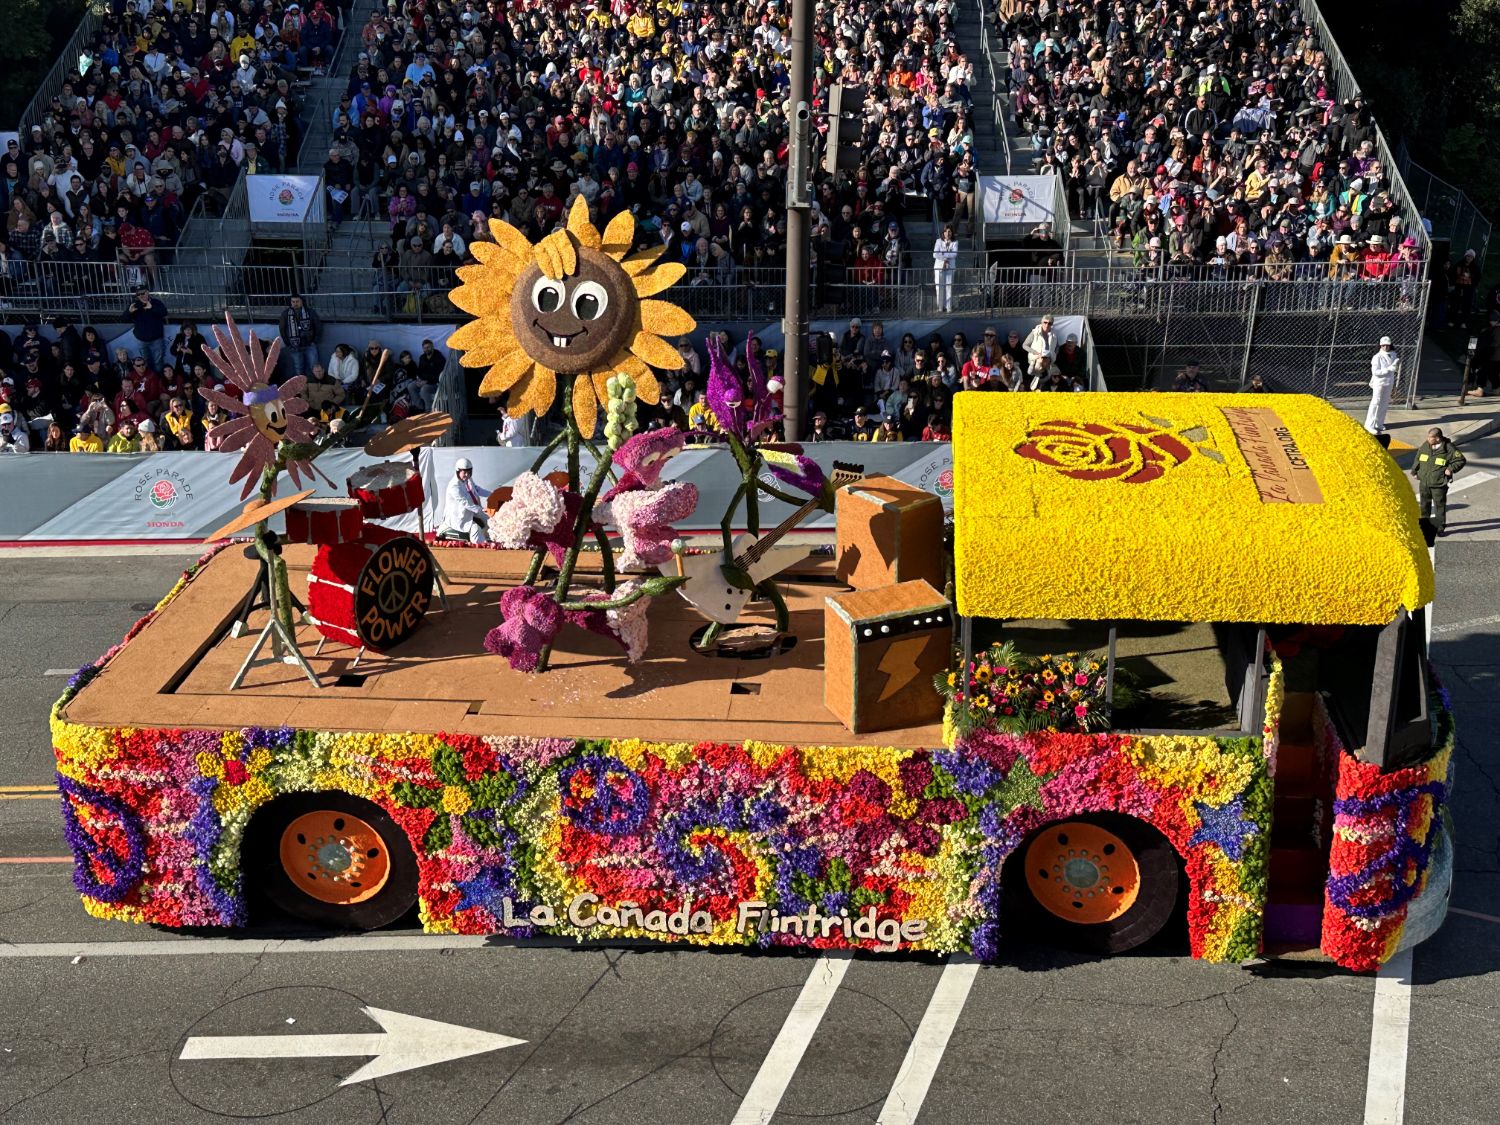 PHOTO: Bill Glazier | The South Pasadenan | “Flower Power” was the name of the La Cañada Flintridge float, a self-built that was presented with the Golden State Award, recognized for outstanding depiction of life in California.